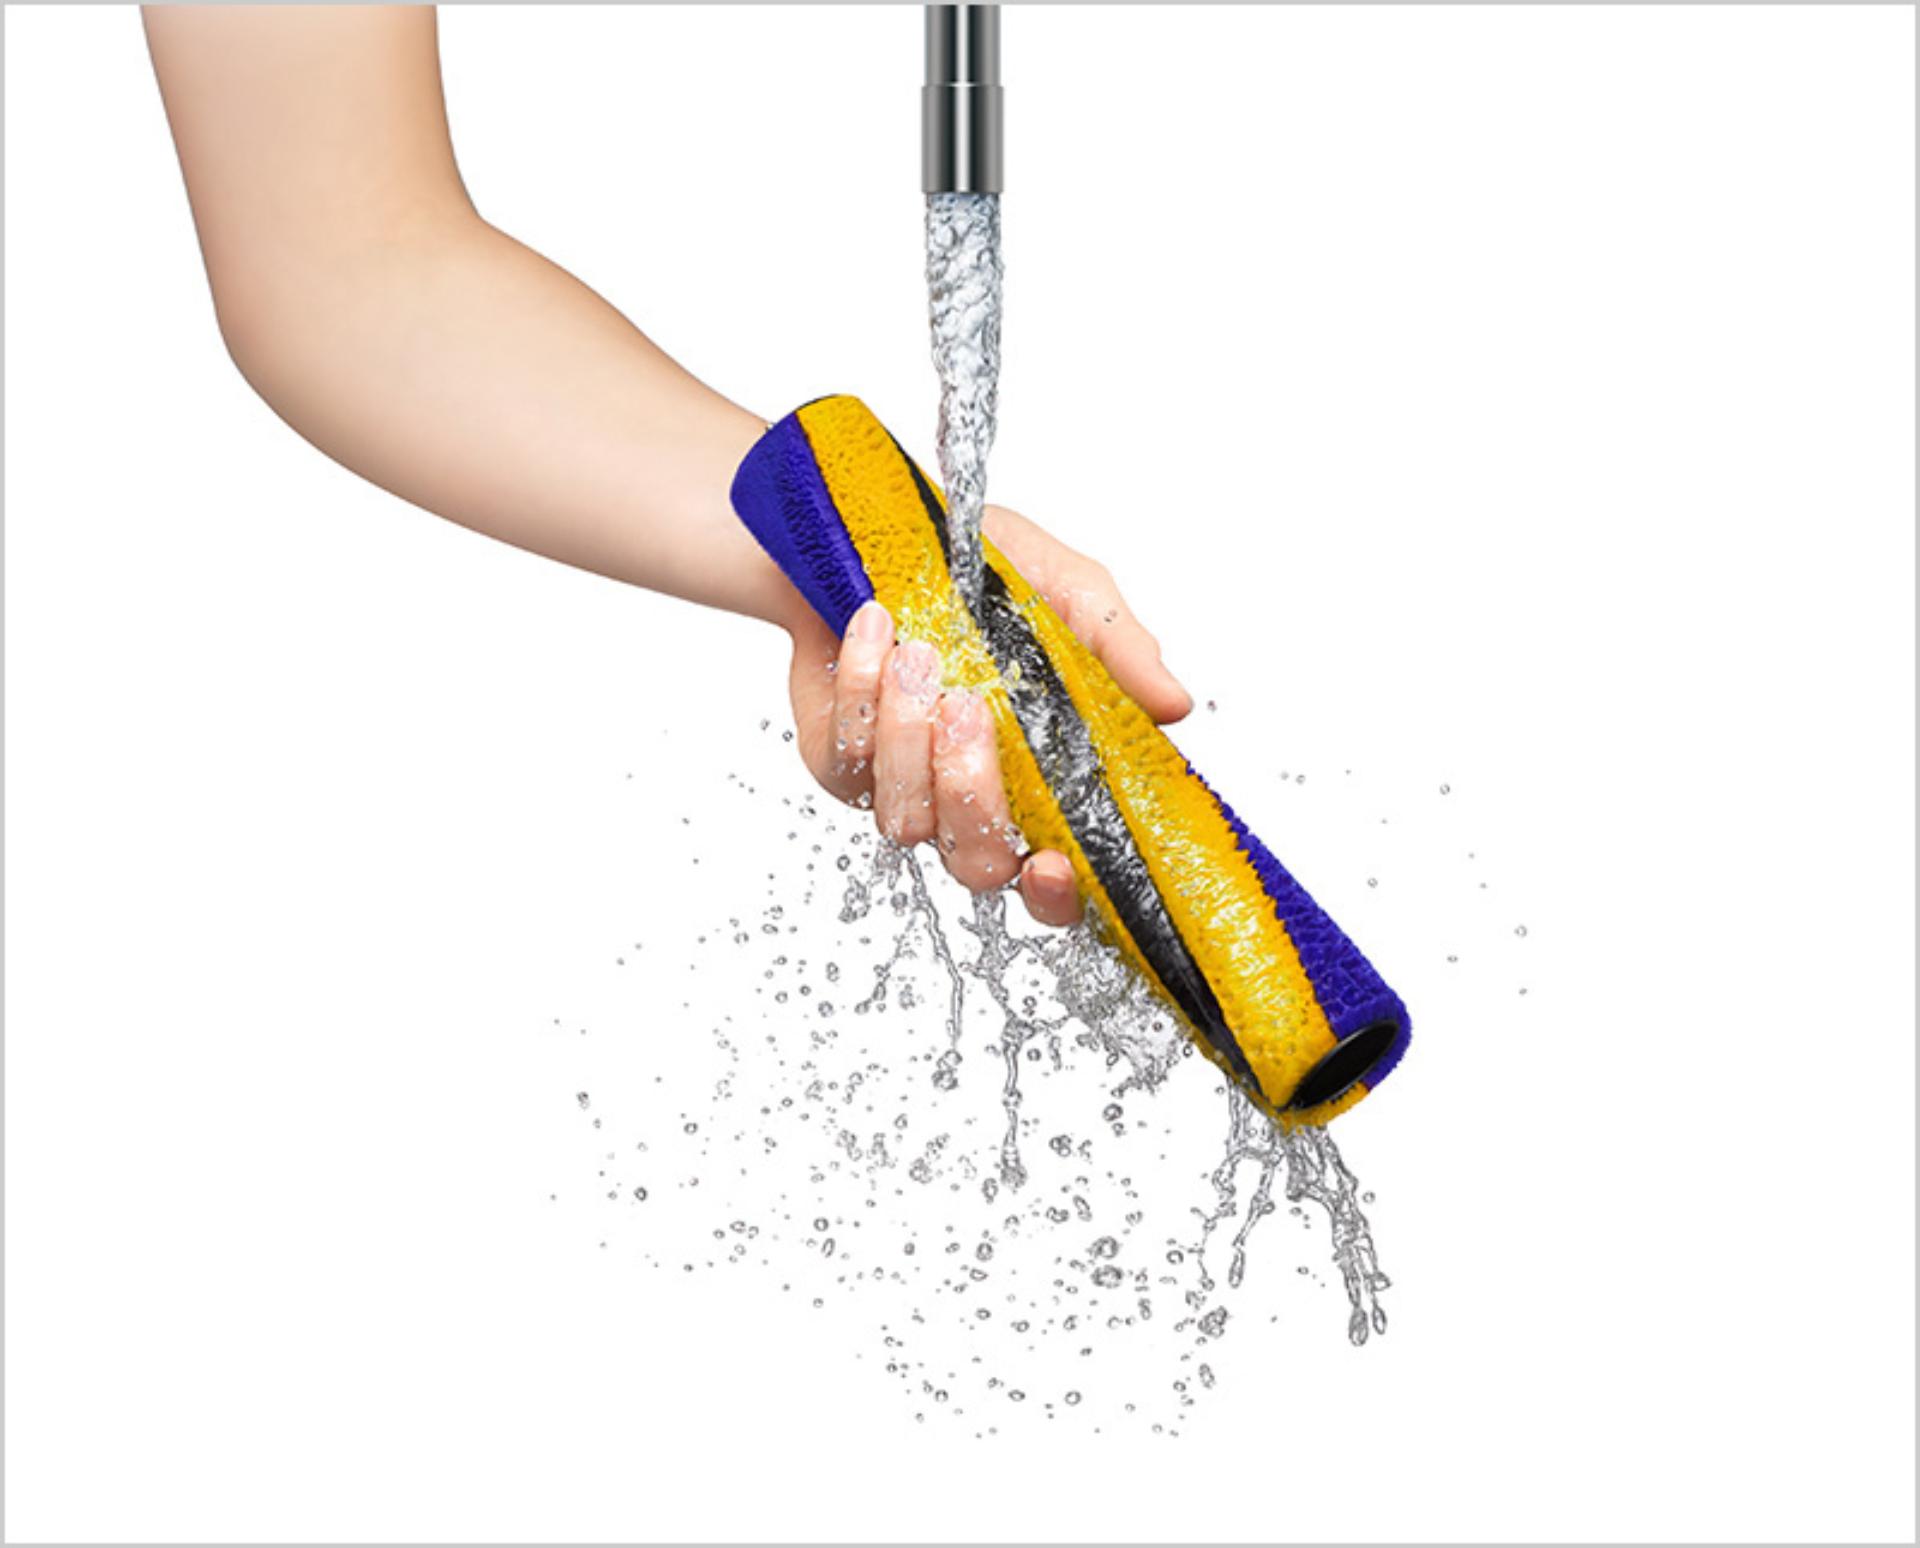 Washing Dyson tools and accessories in water